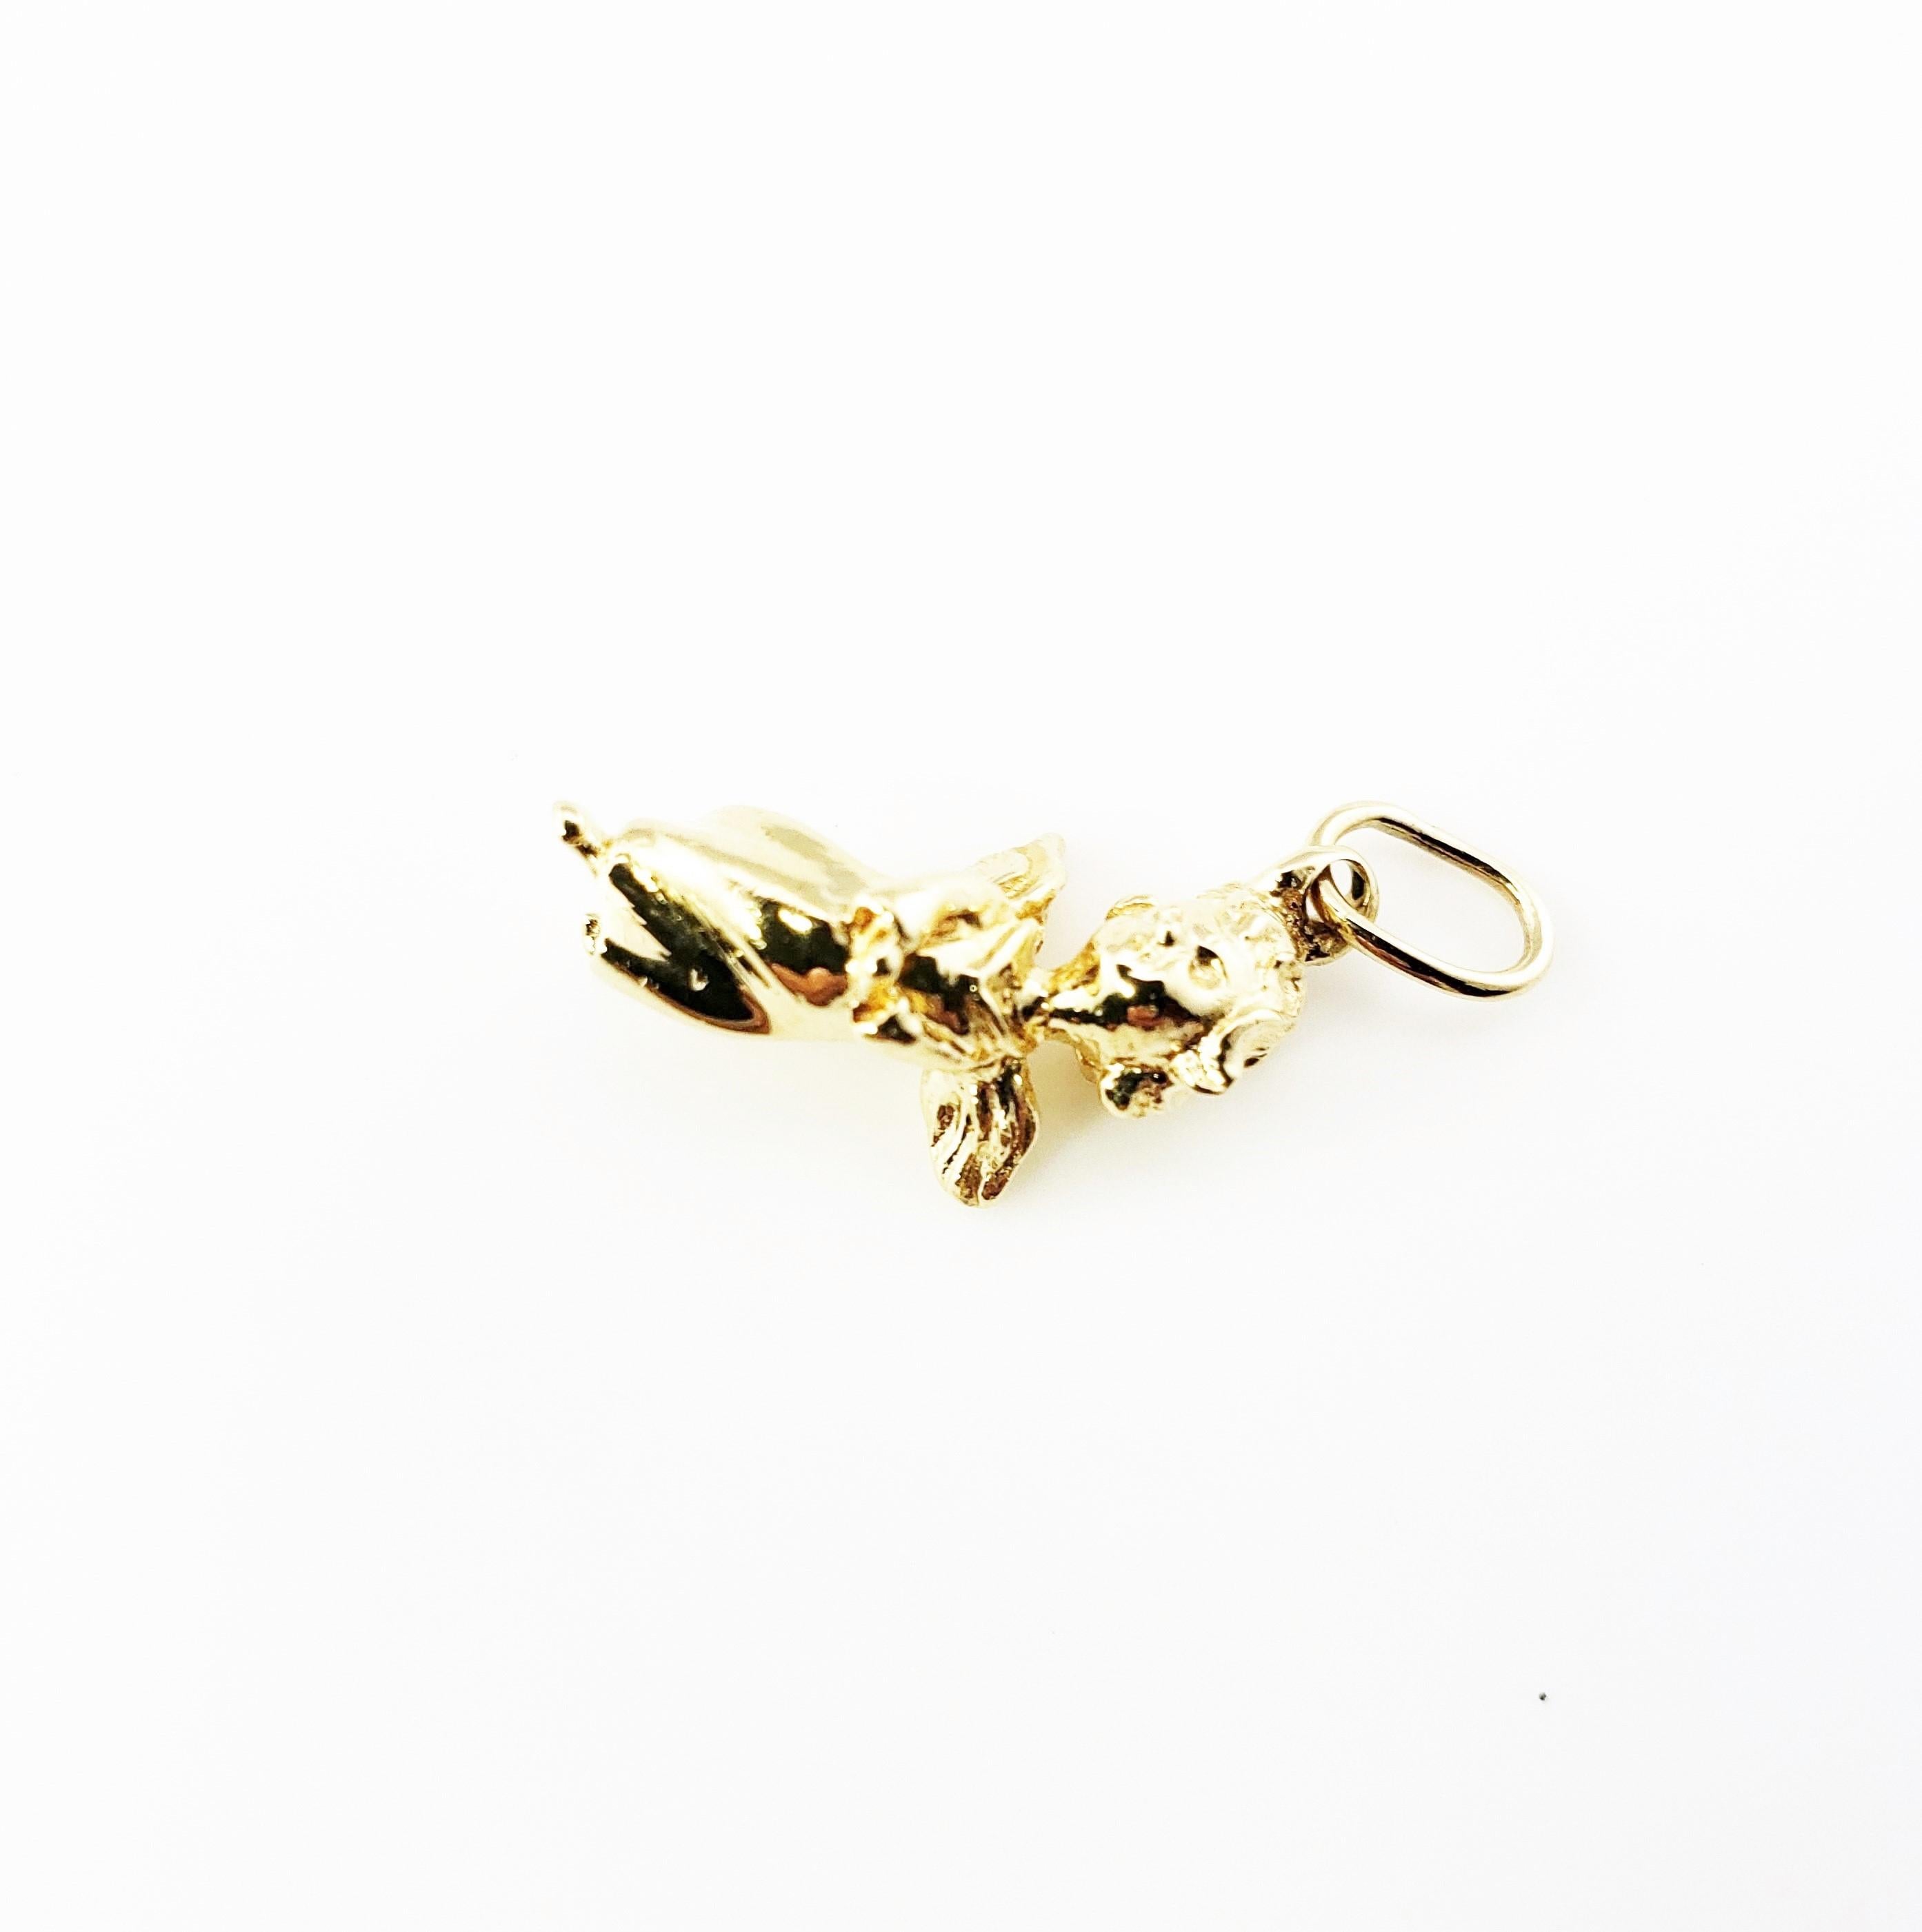 Vintage 14 Karat Yellow Gold Angel Charm

Carry your guardian angel with you always!

This lovely 3D charm features a miniature angel meticulously detailed in 14K yellow gold.

Size: 19 mm x 9 mm - actual charm

Weight: 1.9 dwt. / 3.1 gr.

Stamped: